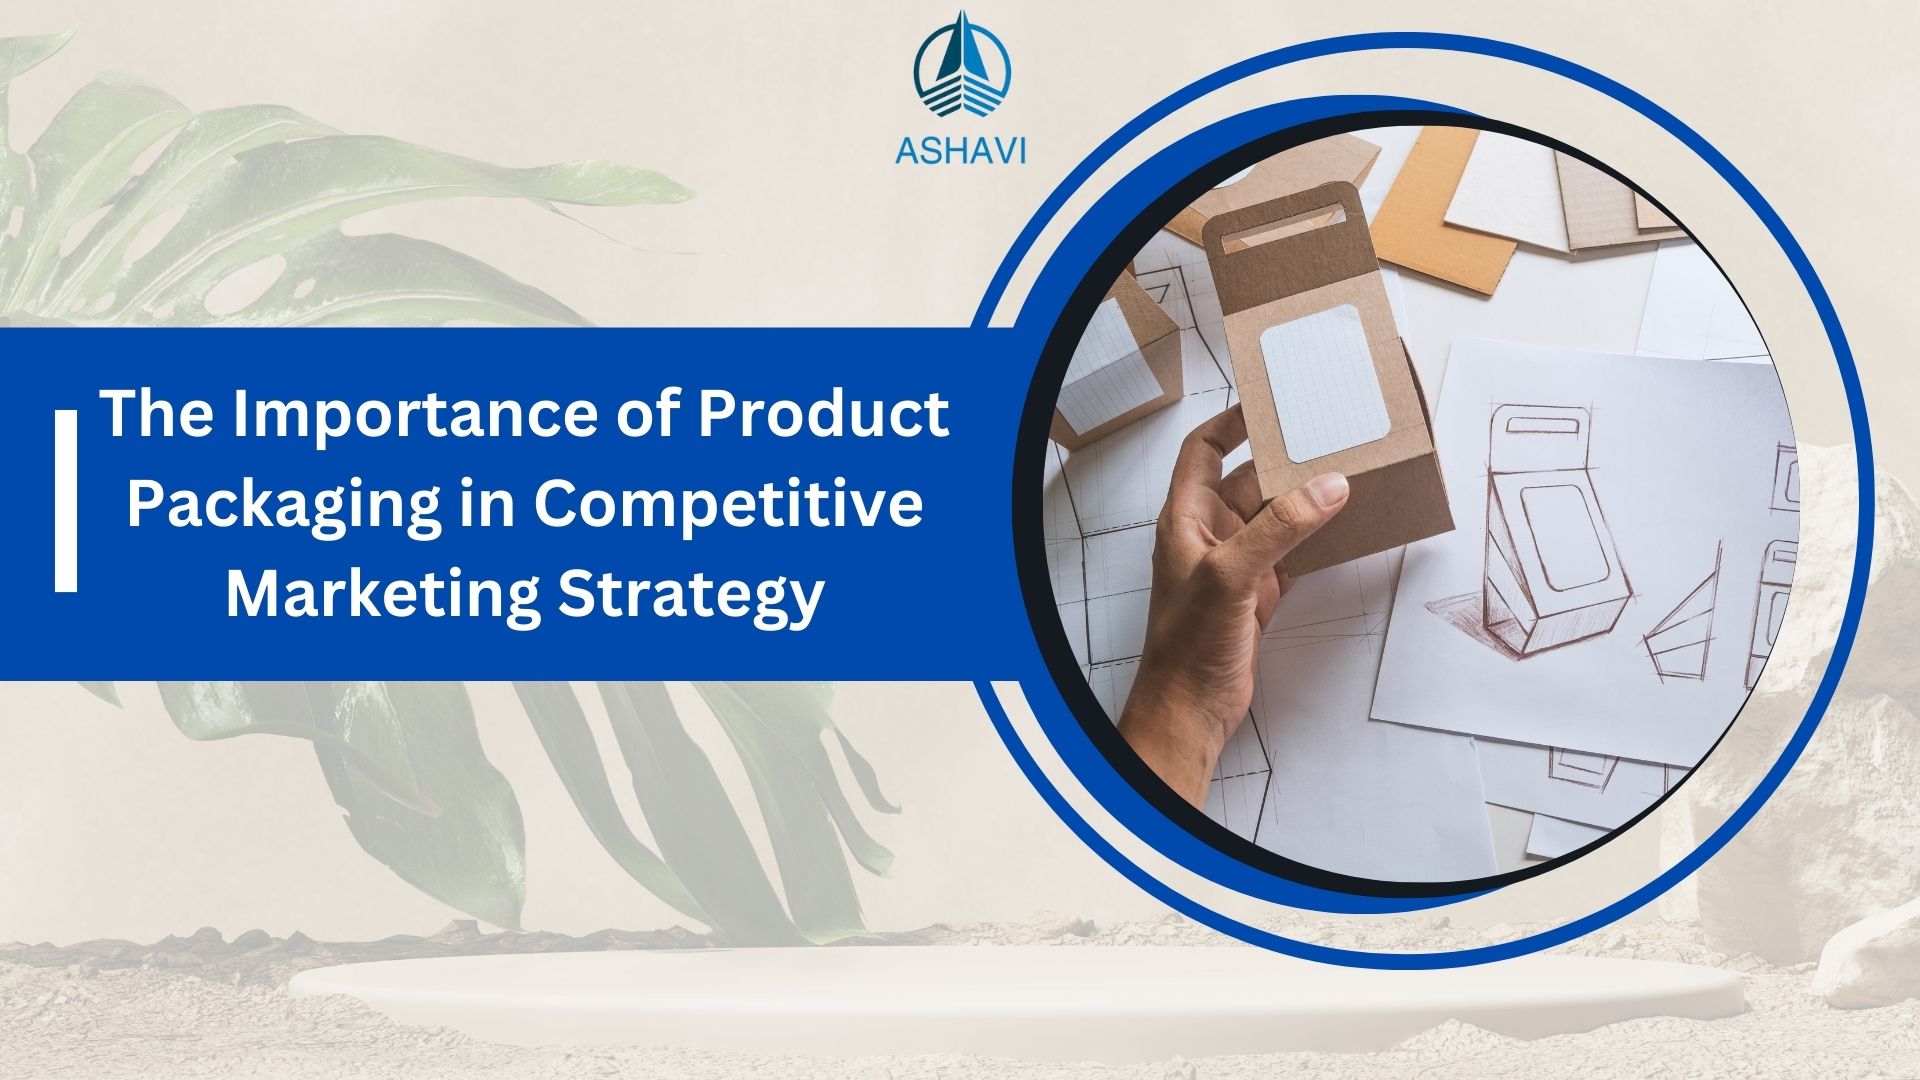 The Importance of Product Packaging in Competitive Marketing Strategy